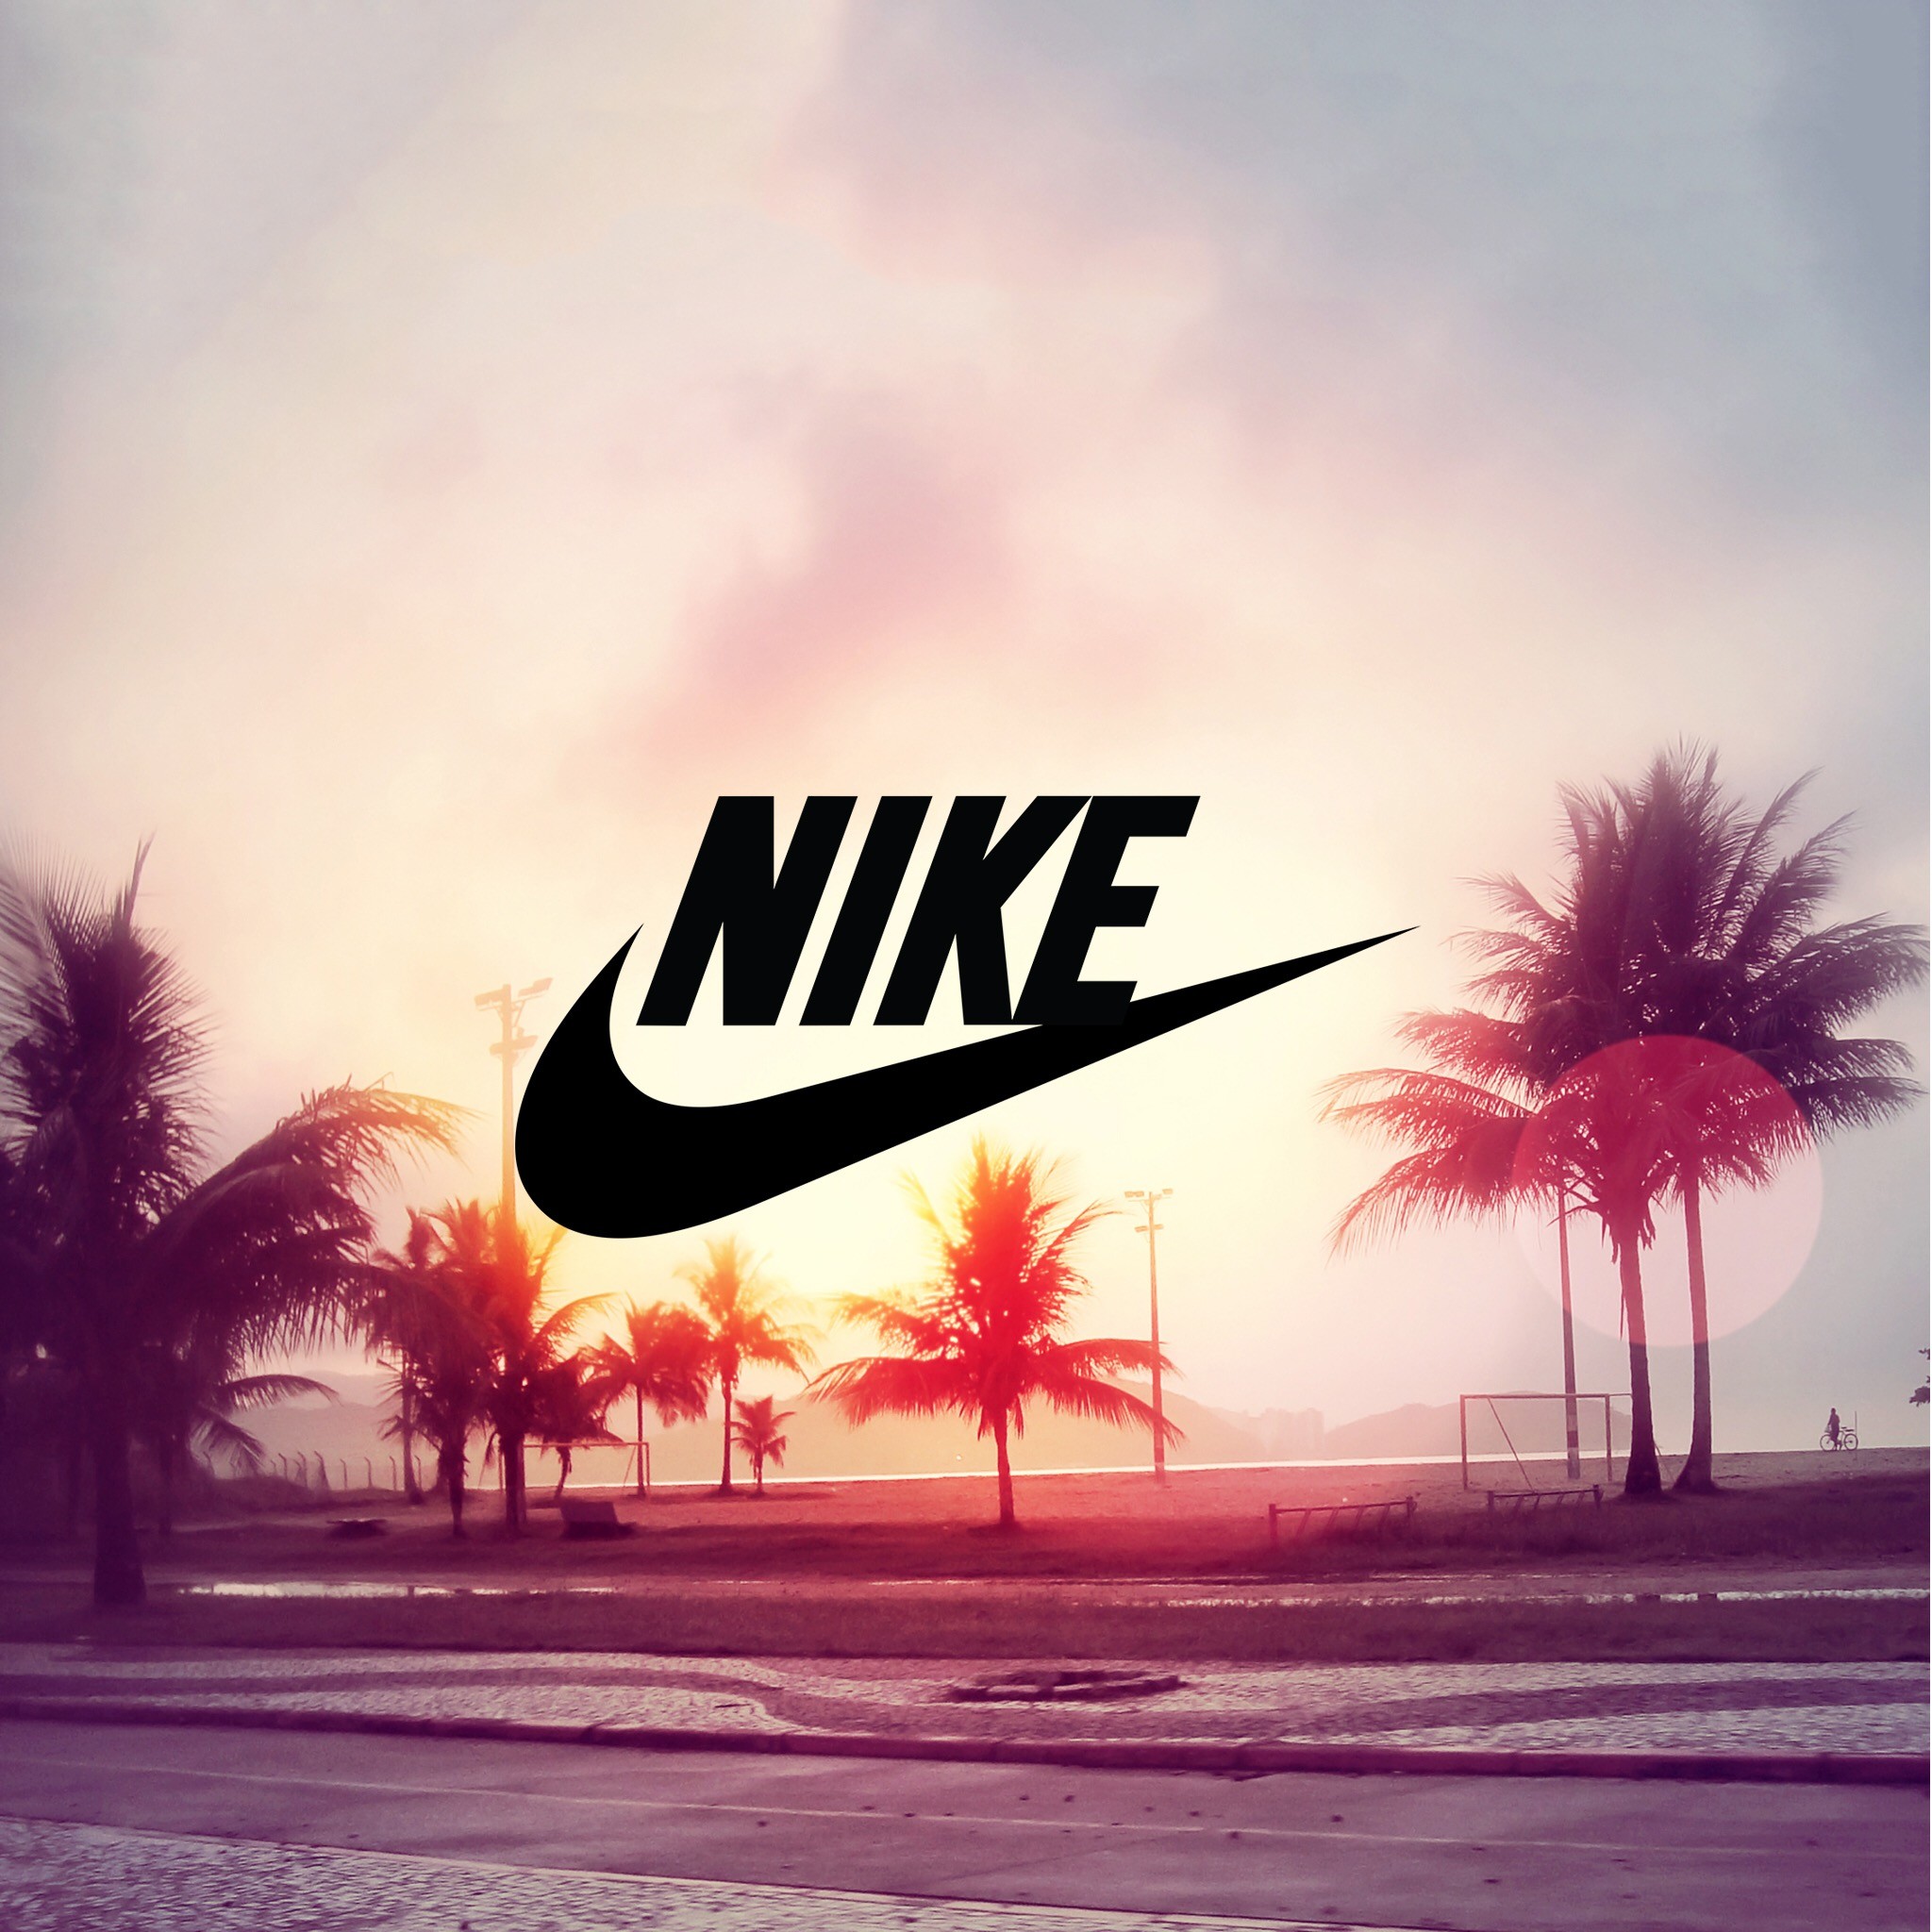 2048x2048 Go places while u still have time... Nike WallpaperIphone ...